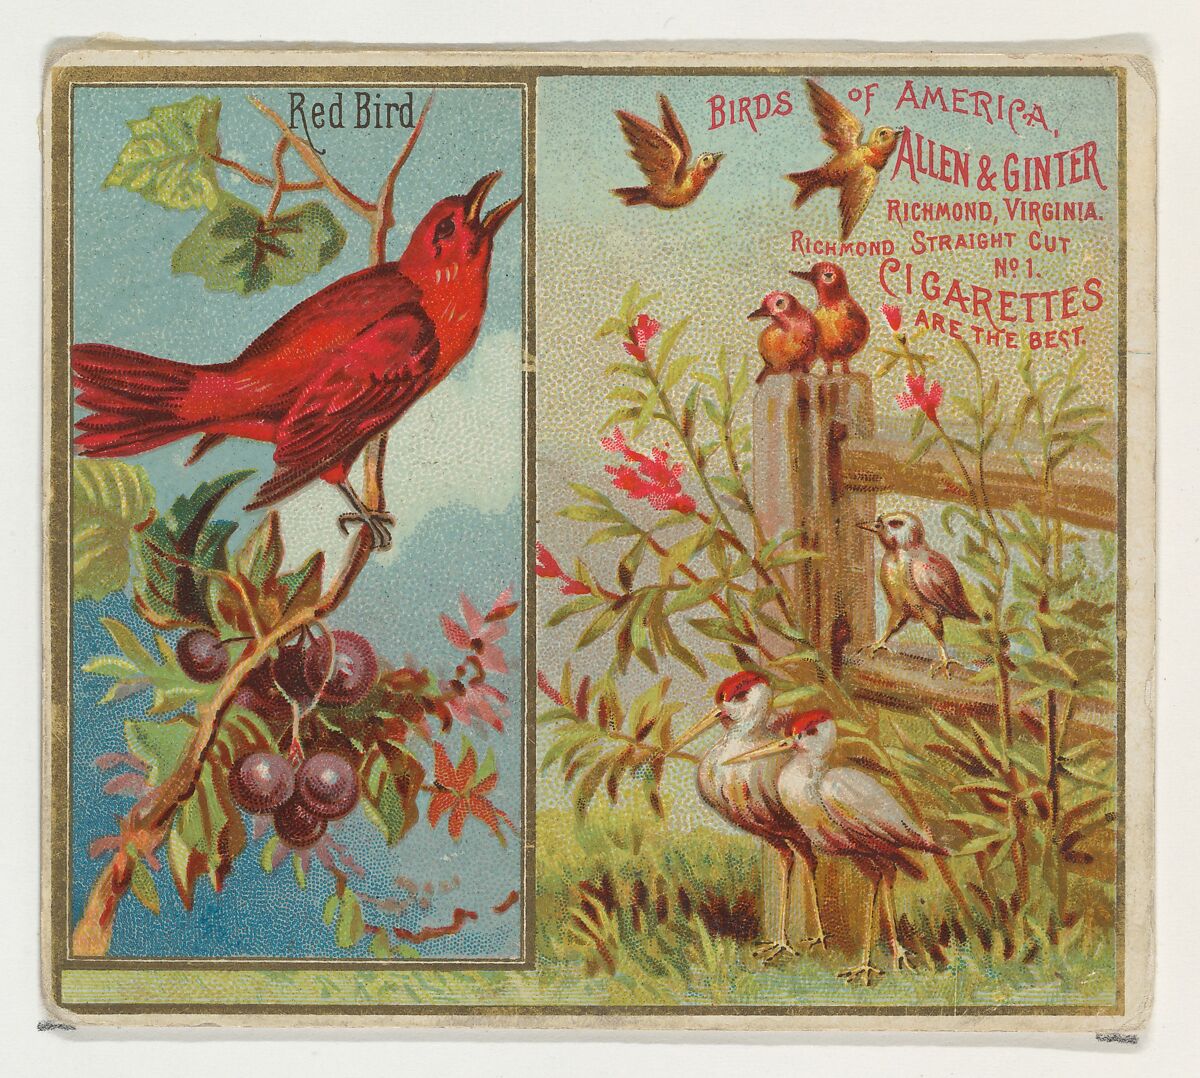 Red Bird, from the Birds of America series (N37) for Allen & Ginter Cigarettes, Issued by Allen &amp; Ginter (American, Richmond, Virginia), Commercial color lithograph 